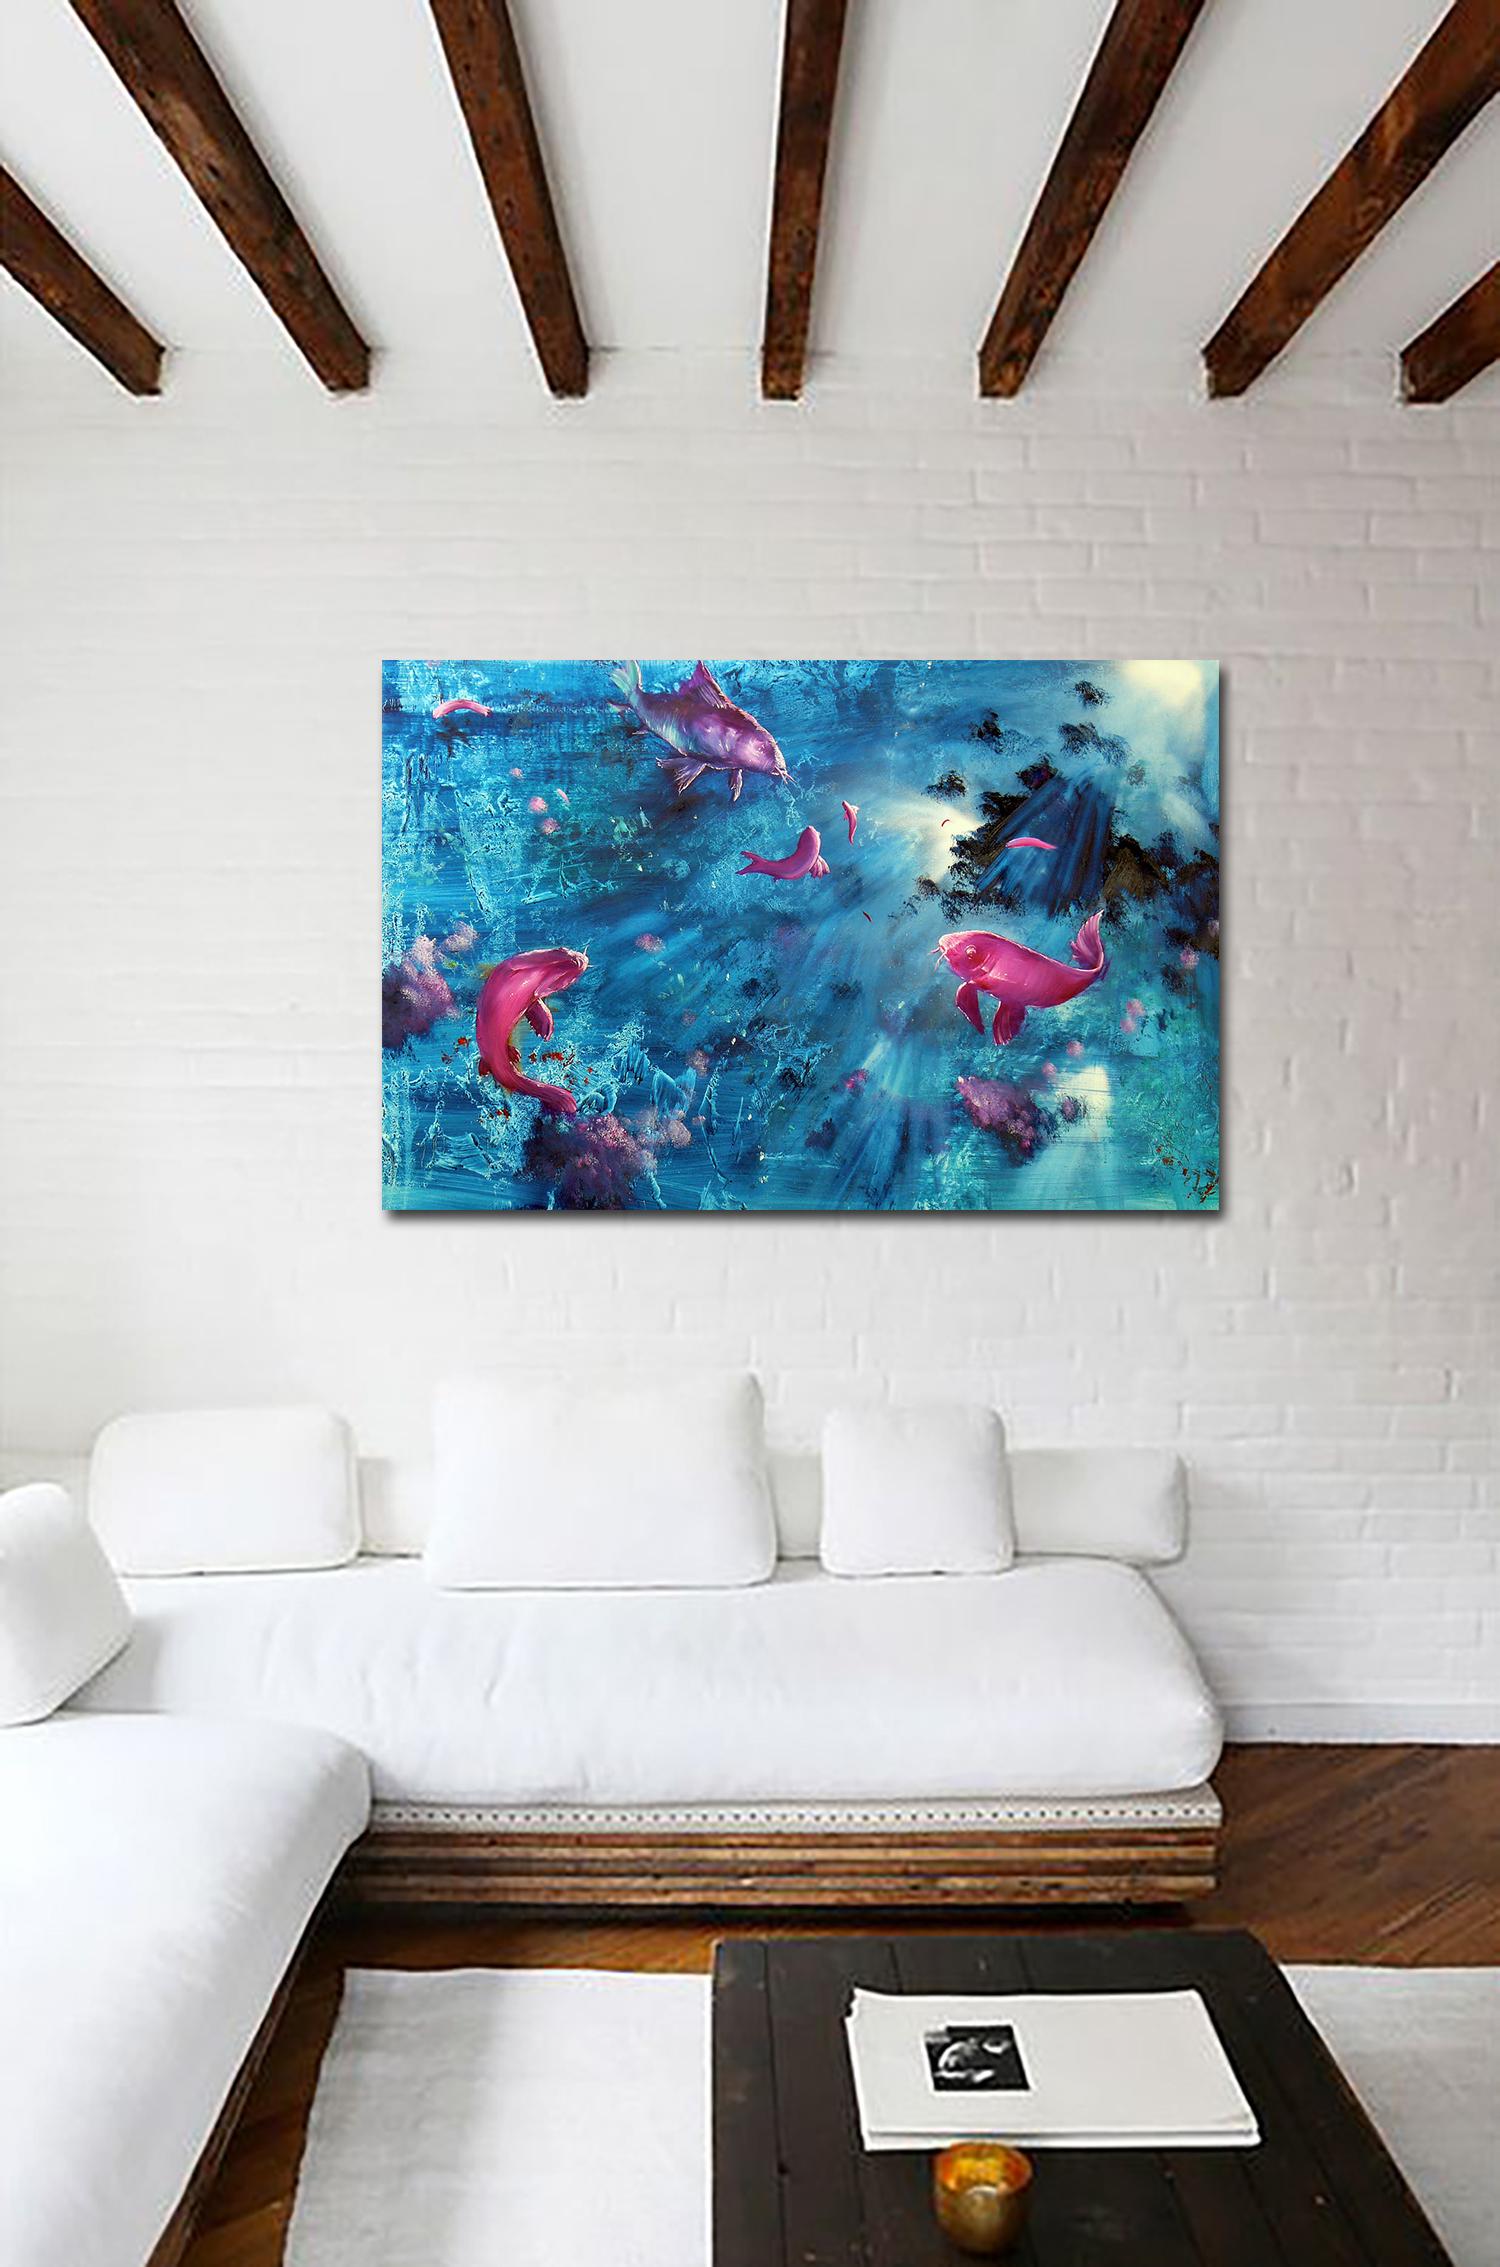 Leibniz Universe 13U - Contemporary and colorful underwater scene, Oil on canvas - Painting by Gian Marco Capraro